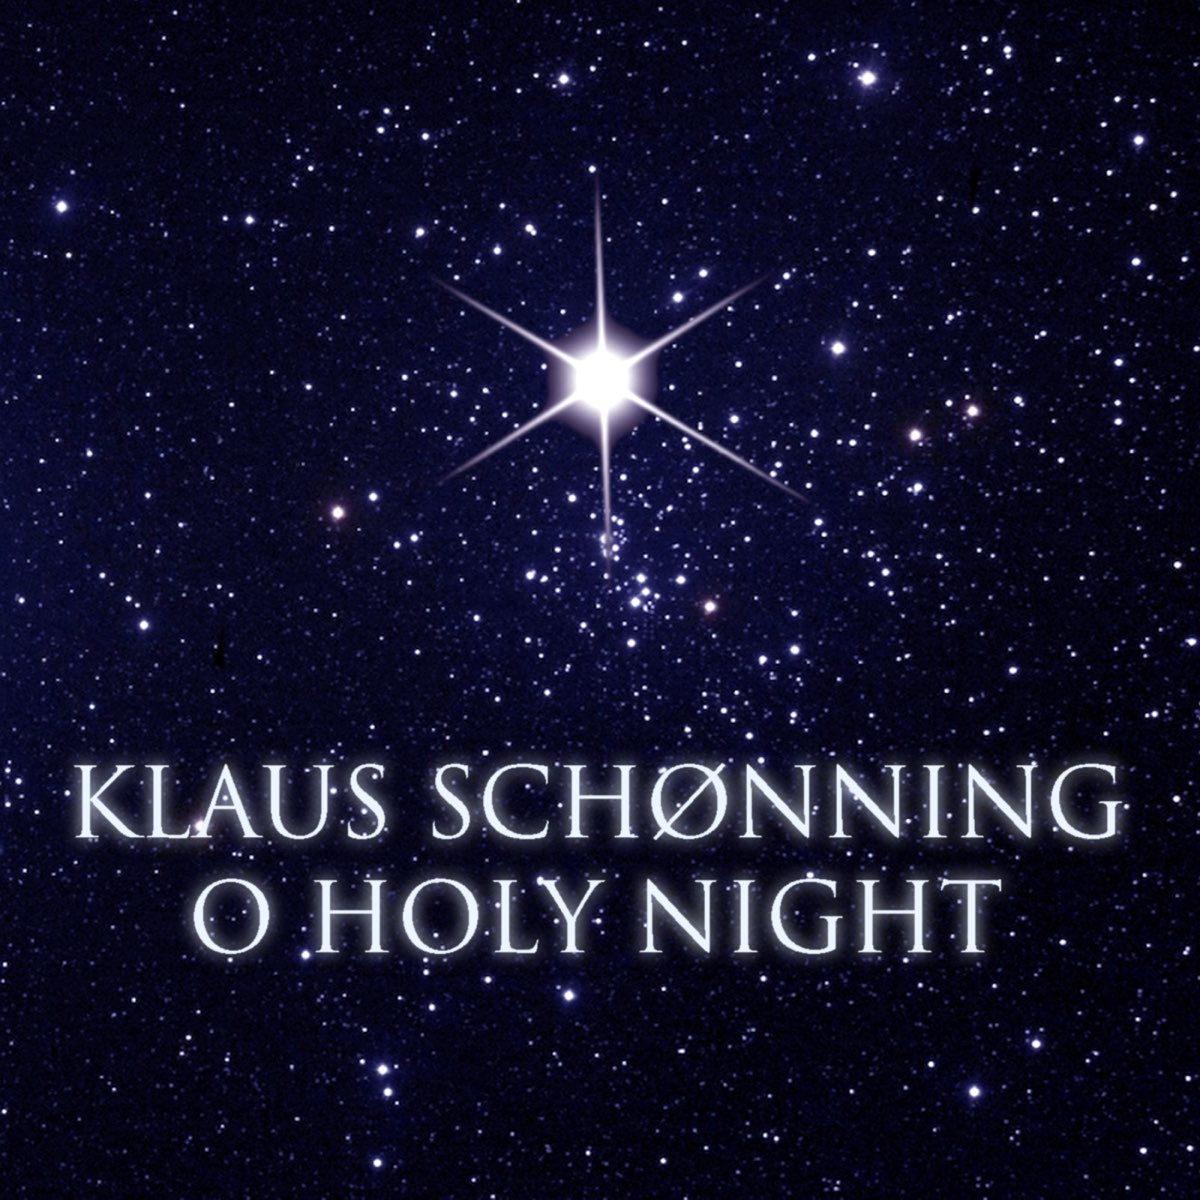 O Holy Night - EP by Klaus Schønning on Apple Music